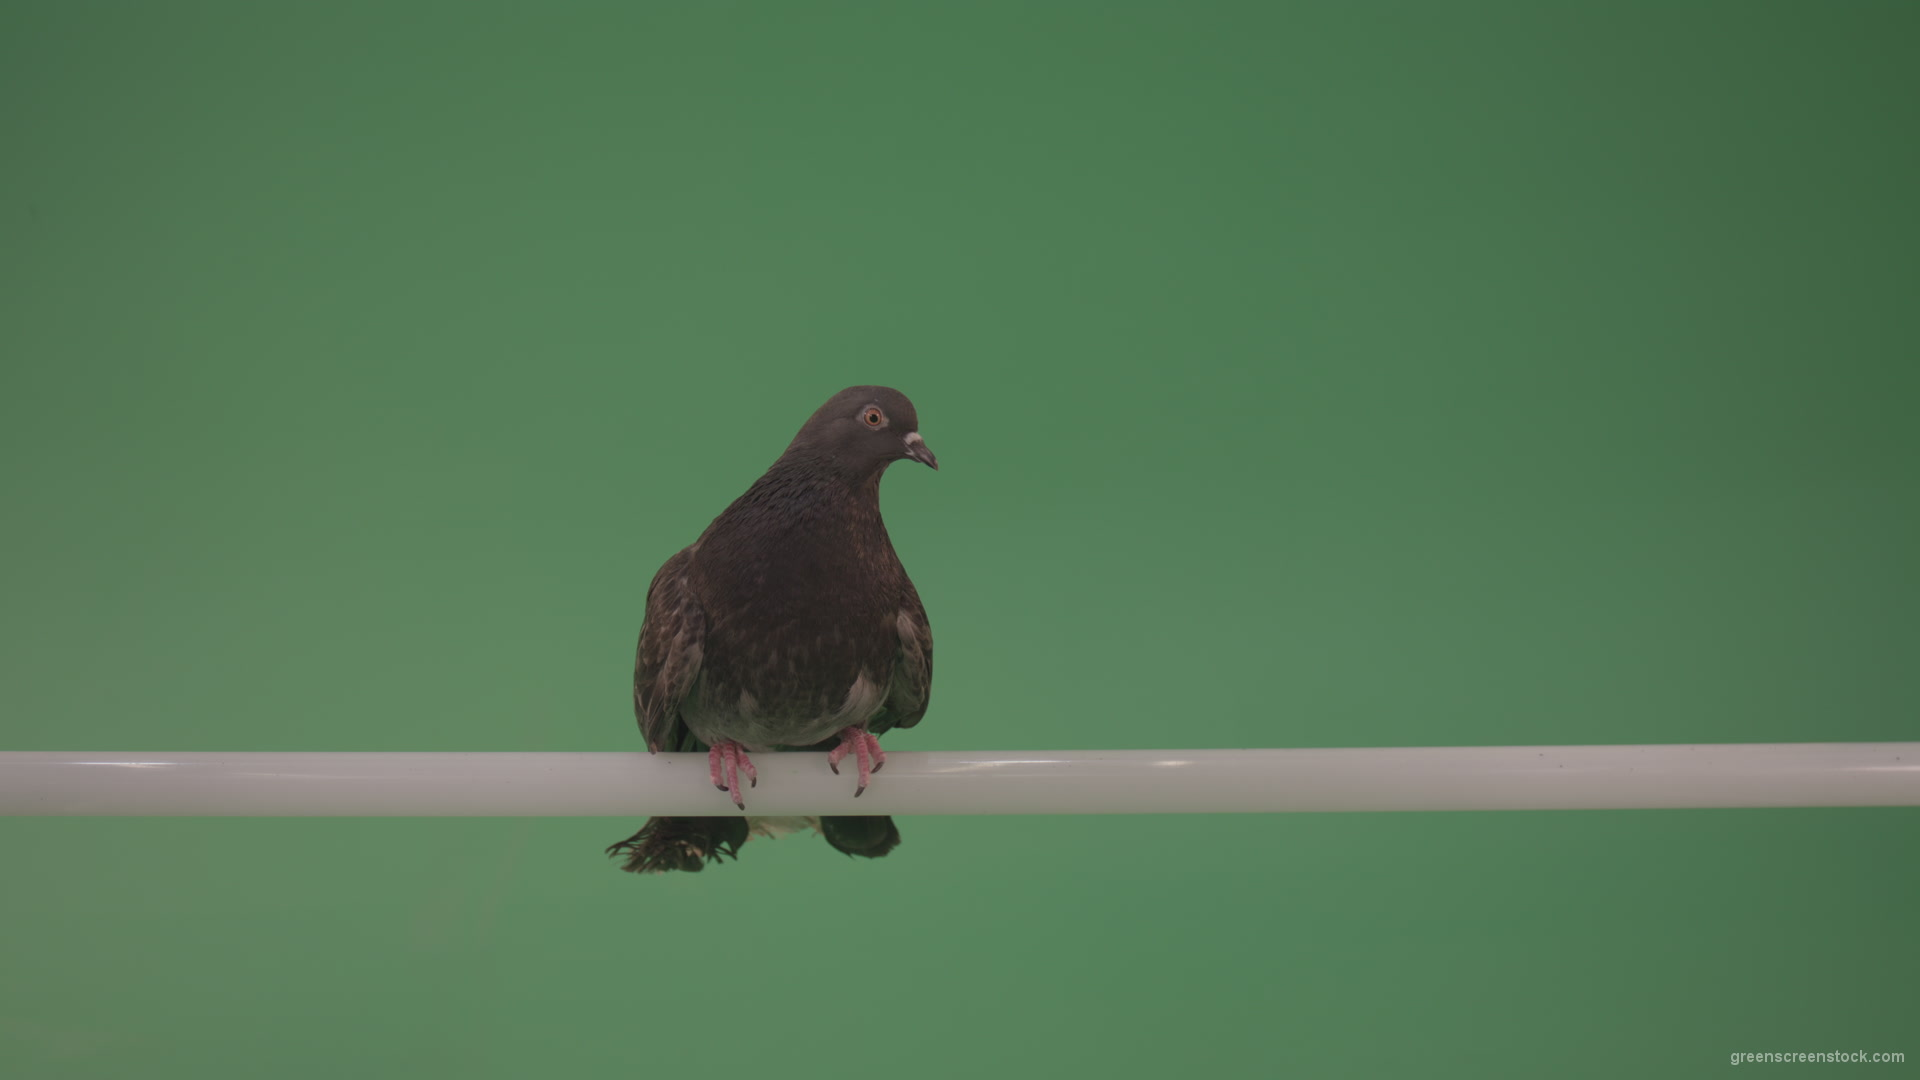 City-bird-of-a-dove-sitting-on-a-branch-in-the-city-isolated-on-green-background_005 Green Screen Stock